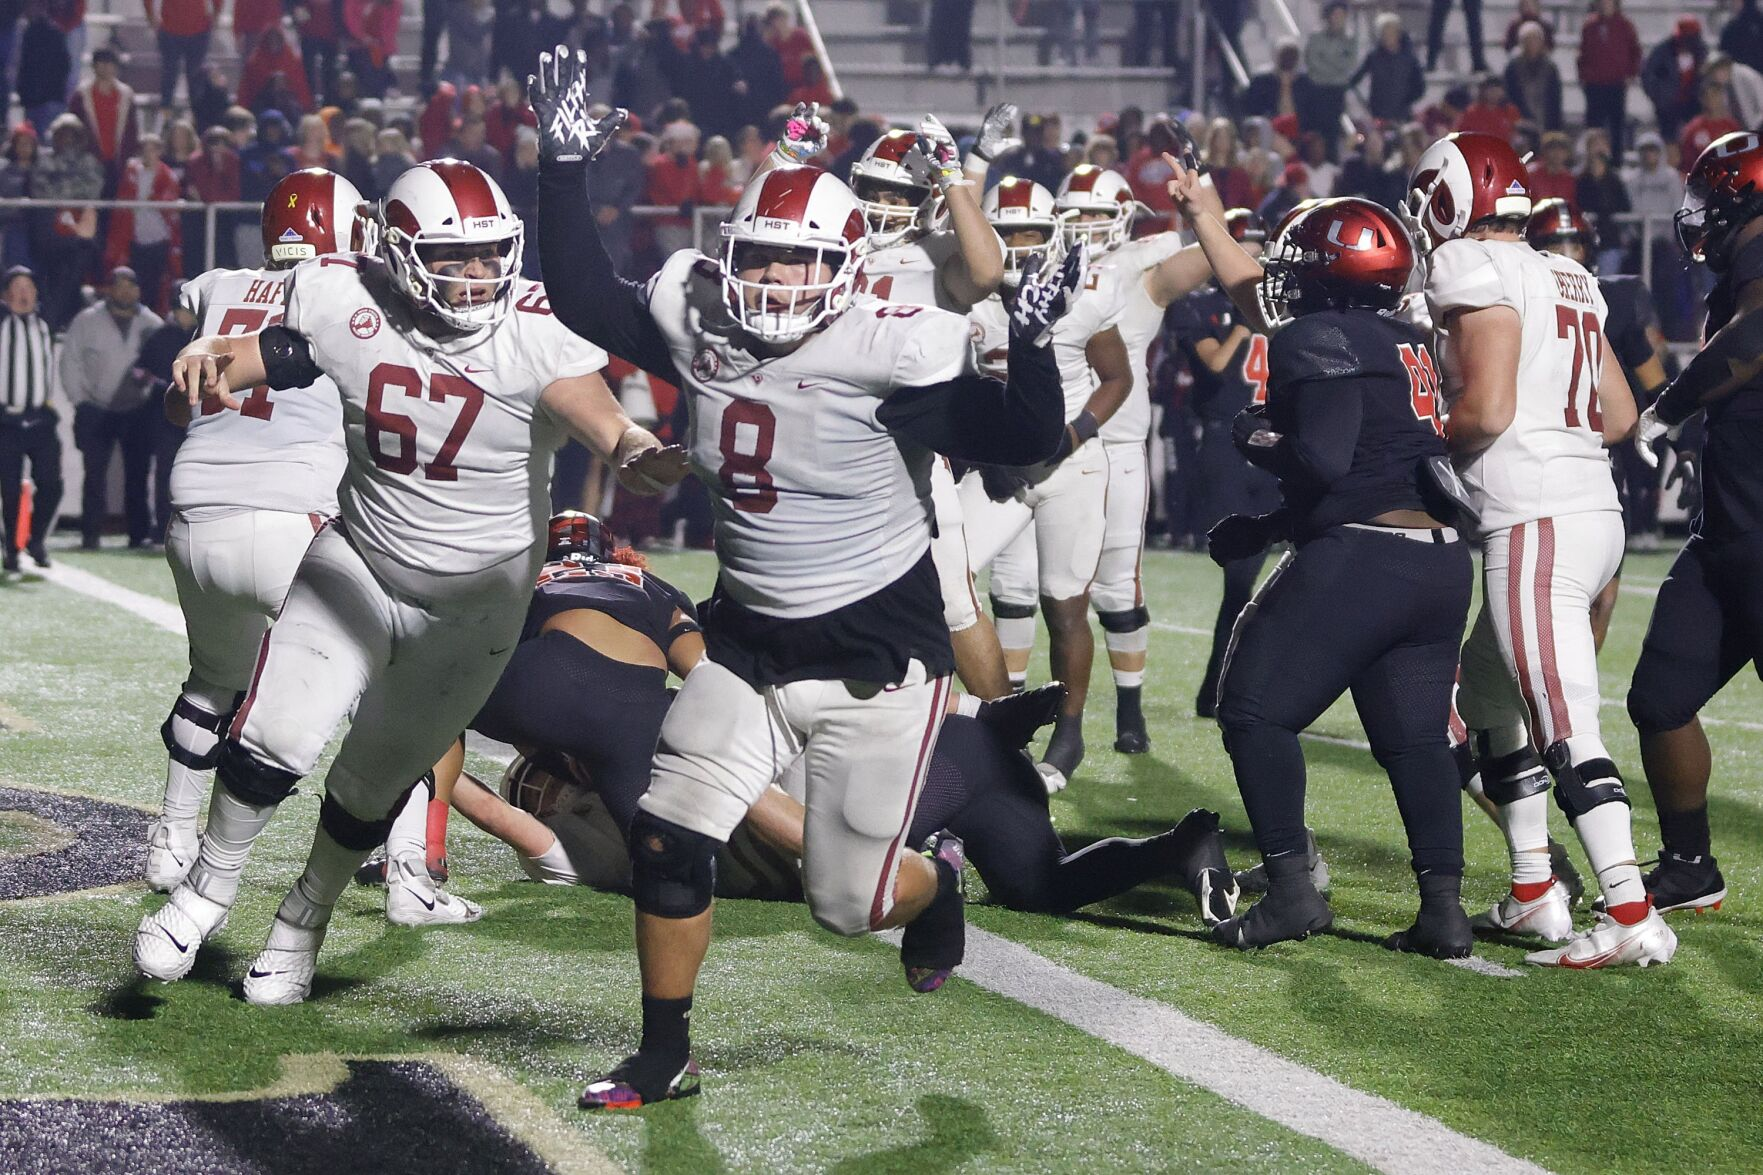 This week's blockbuster: Owasso at Union